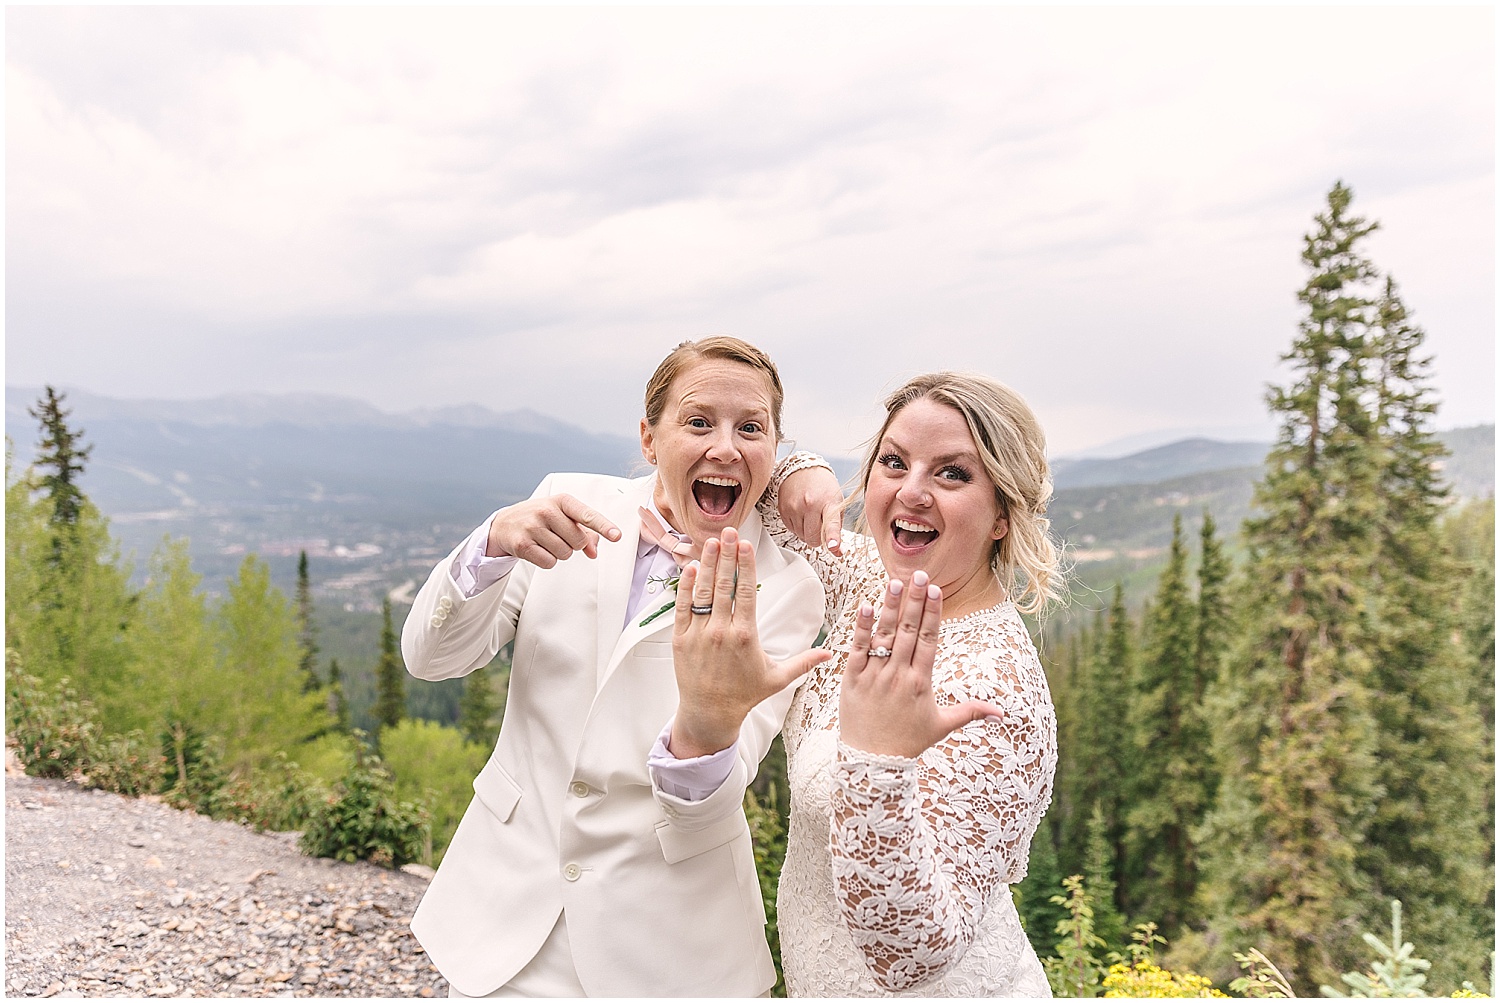 Excited brides showing off their wedding rings in Boreas Pass, Breckenridge